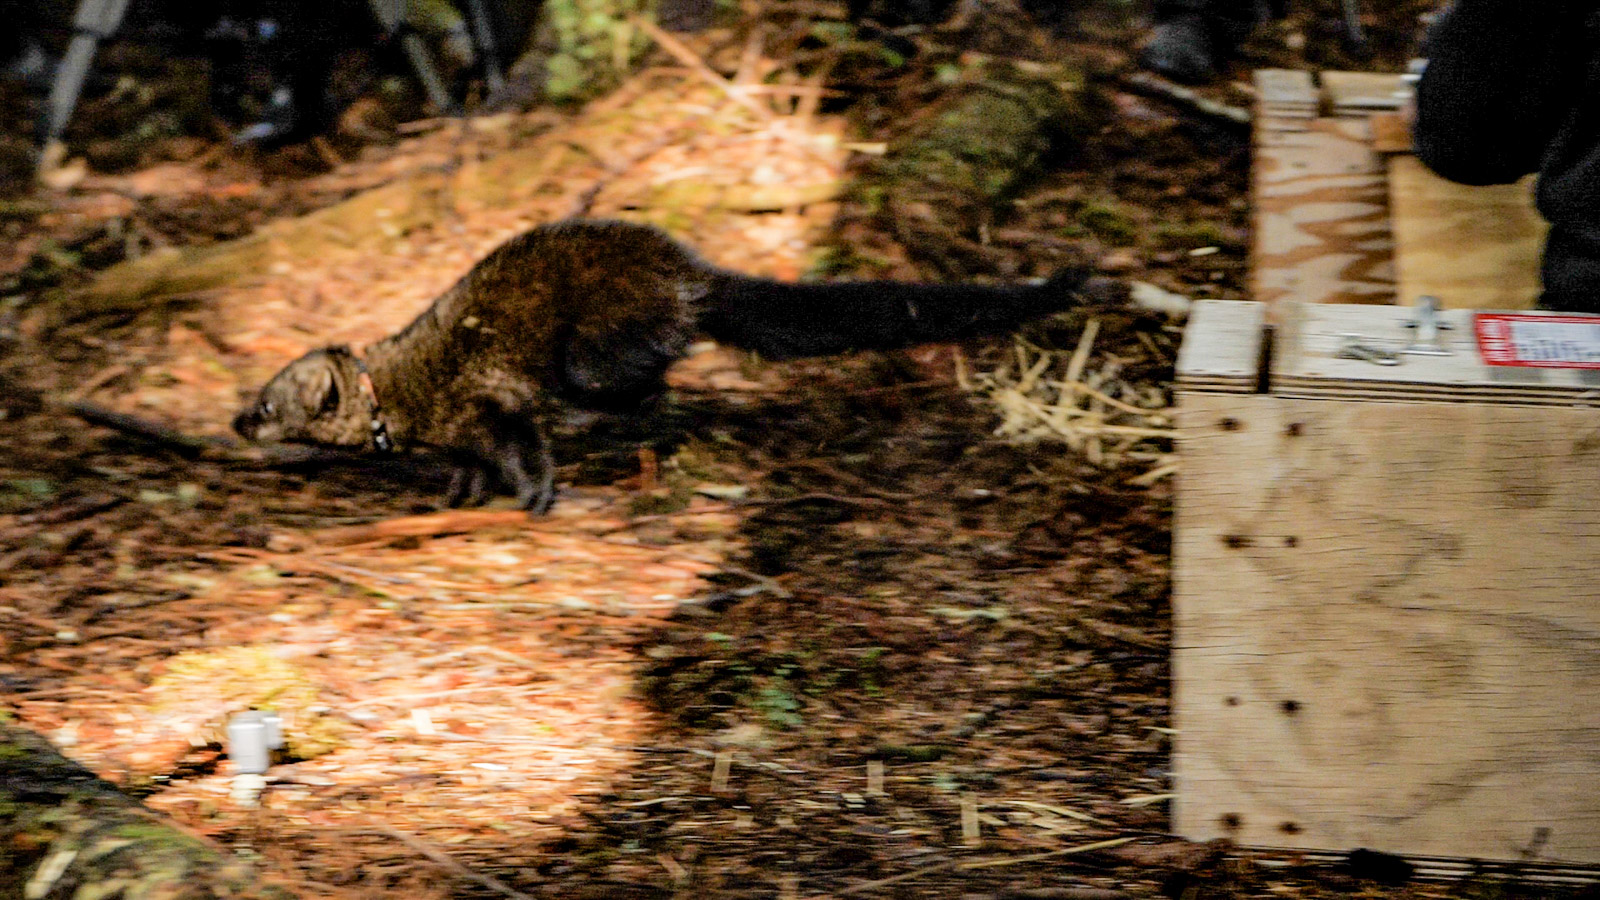 Dark brown, weasel-shaped mammal about as big as a house cat - is released from wooden crate, running into the forest.